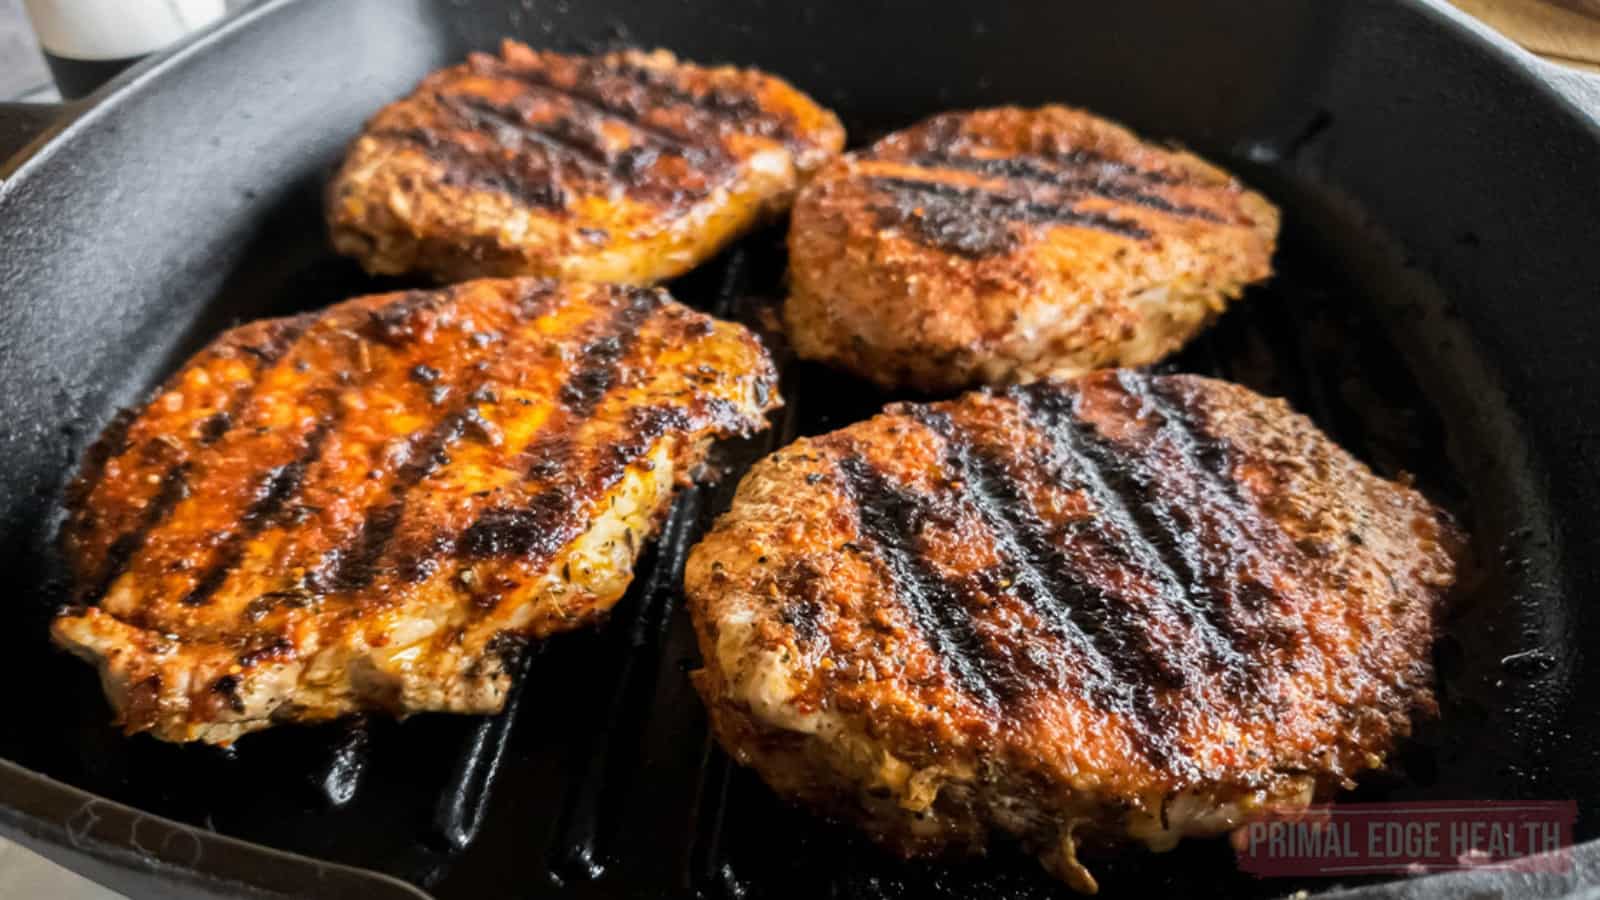 Four blackened pork chops recipe in cast iron grill pan.